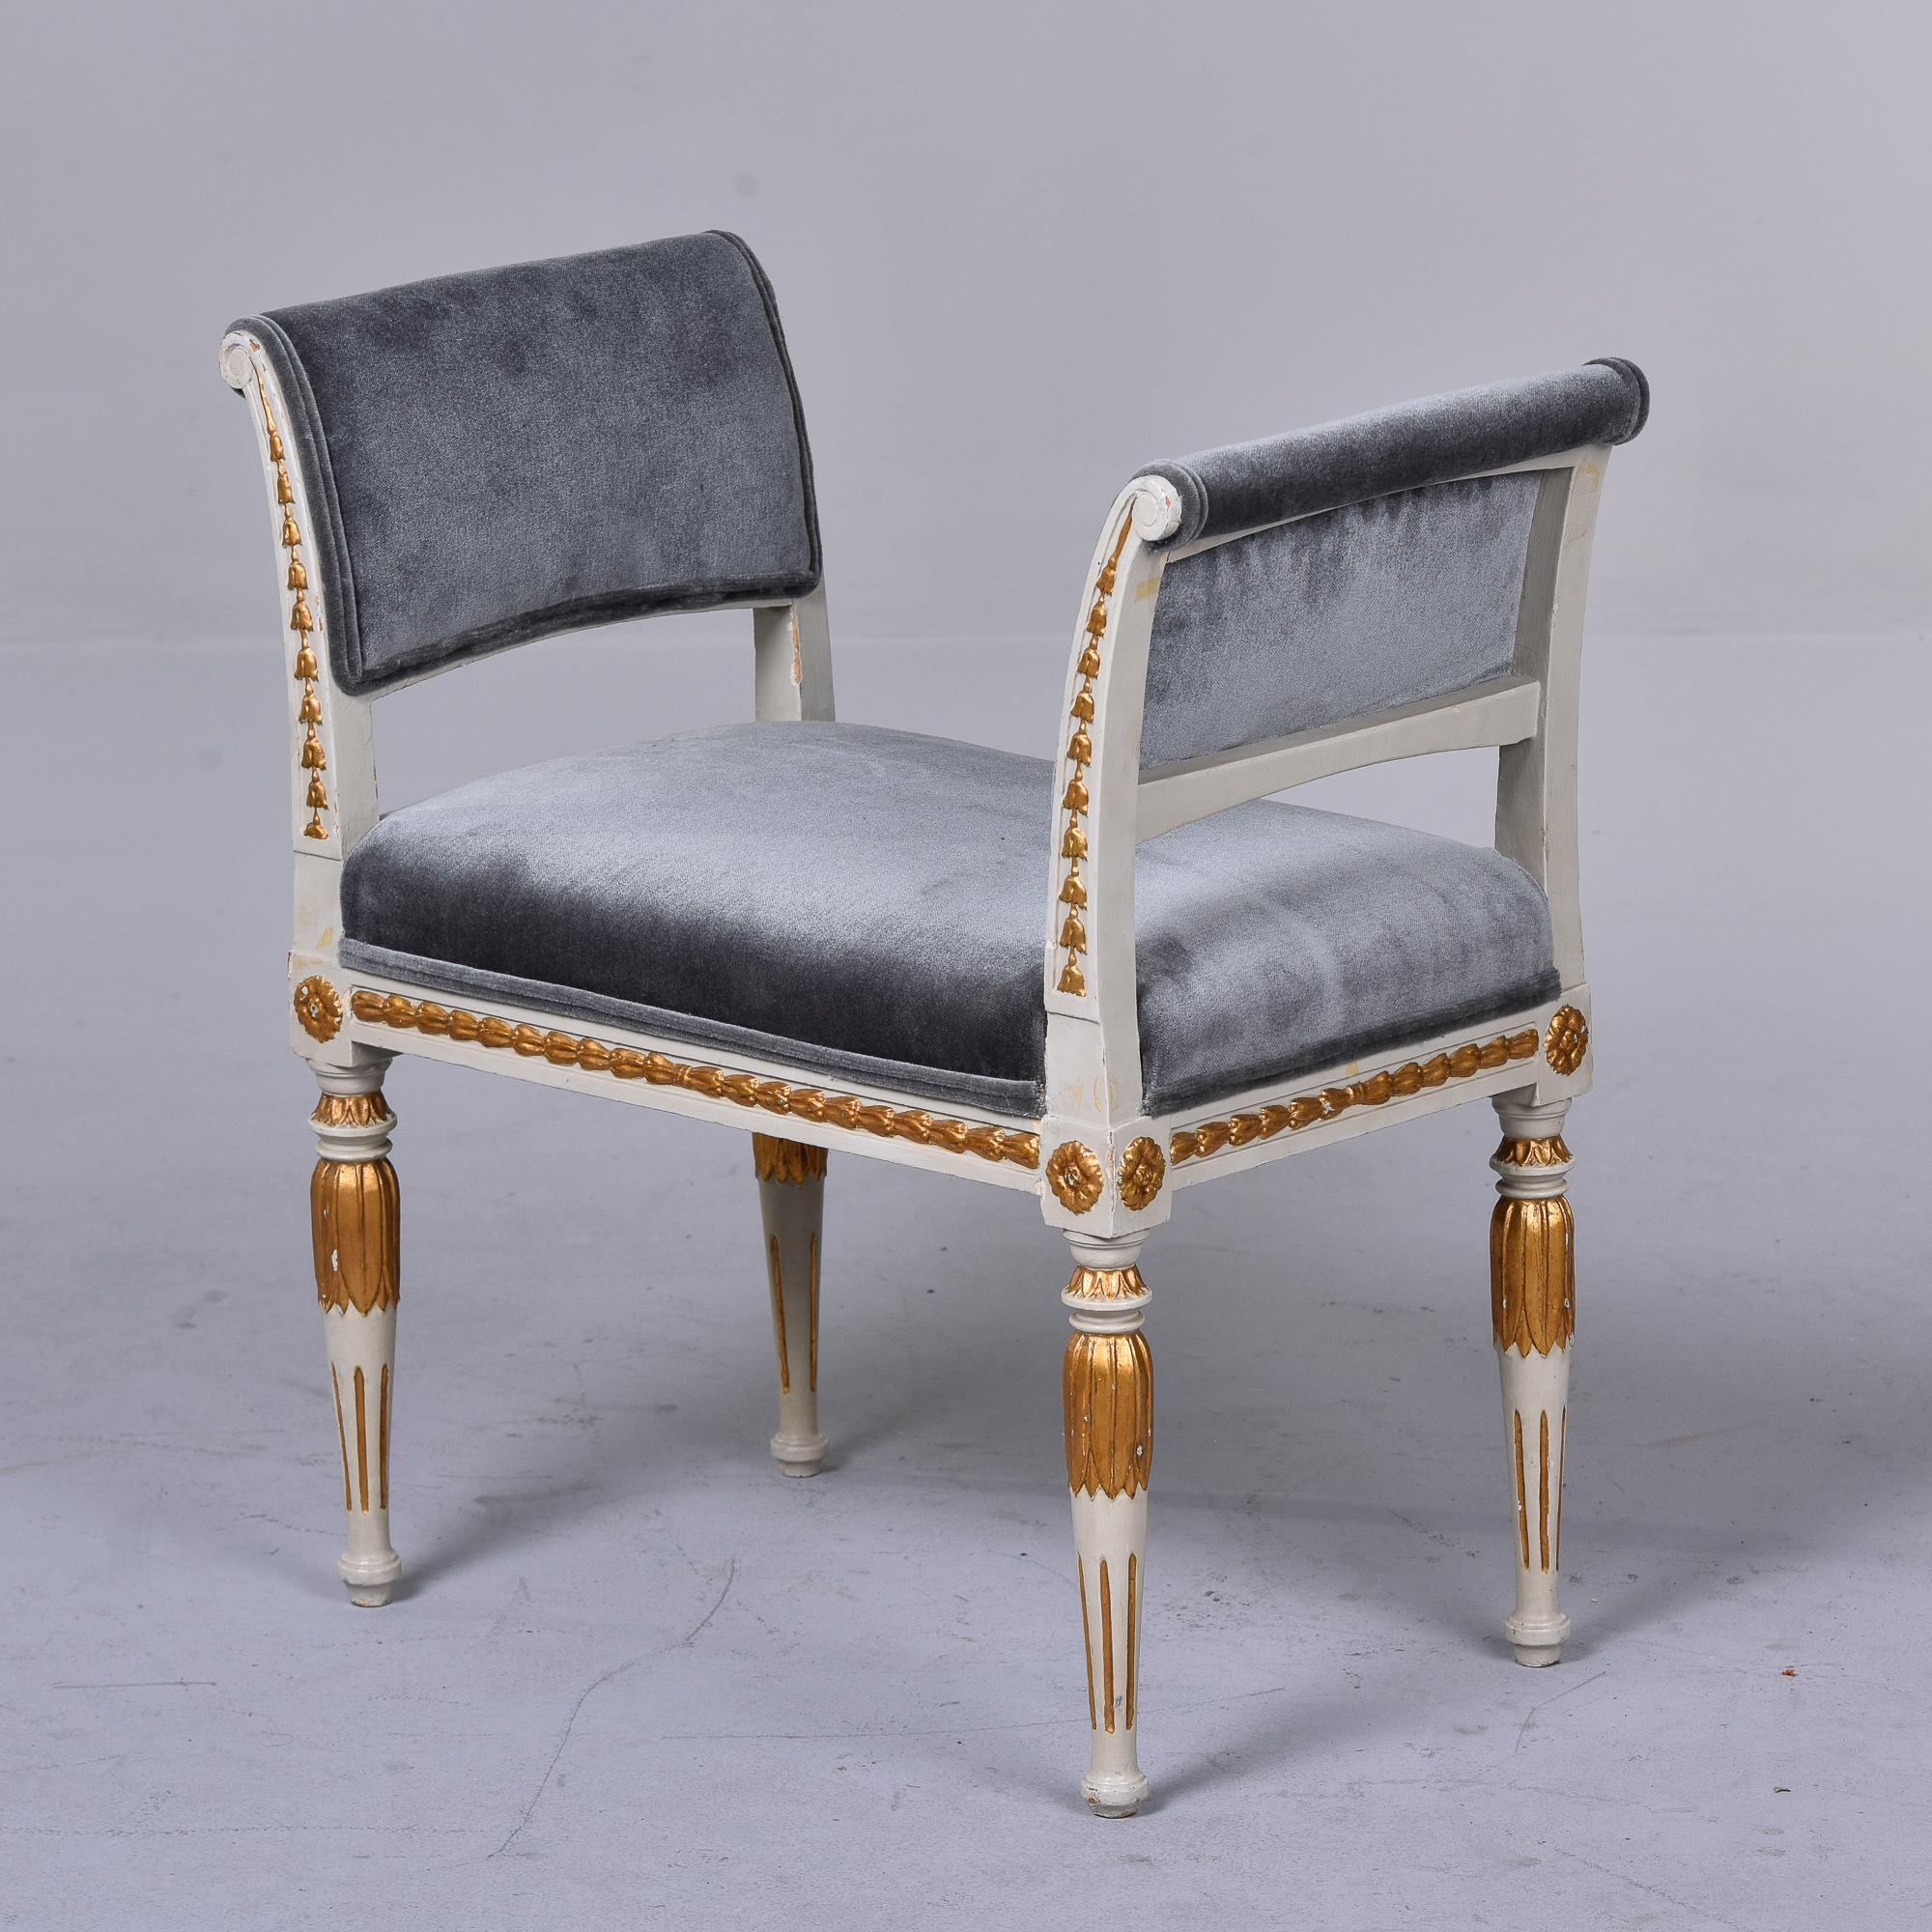 Empire Style High Sided Bench with Gilt Details and Mohair Velvet Upholstery For Sale 1